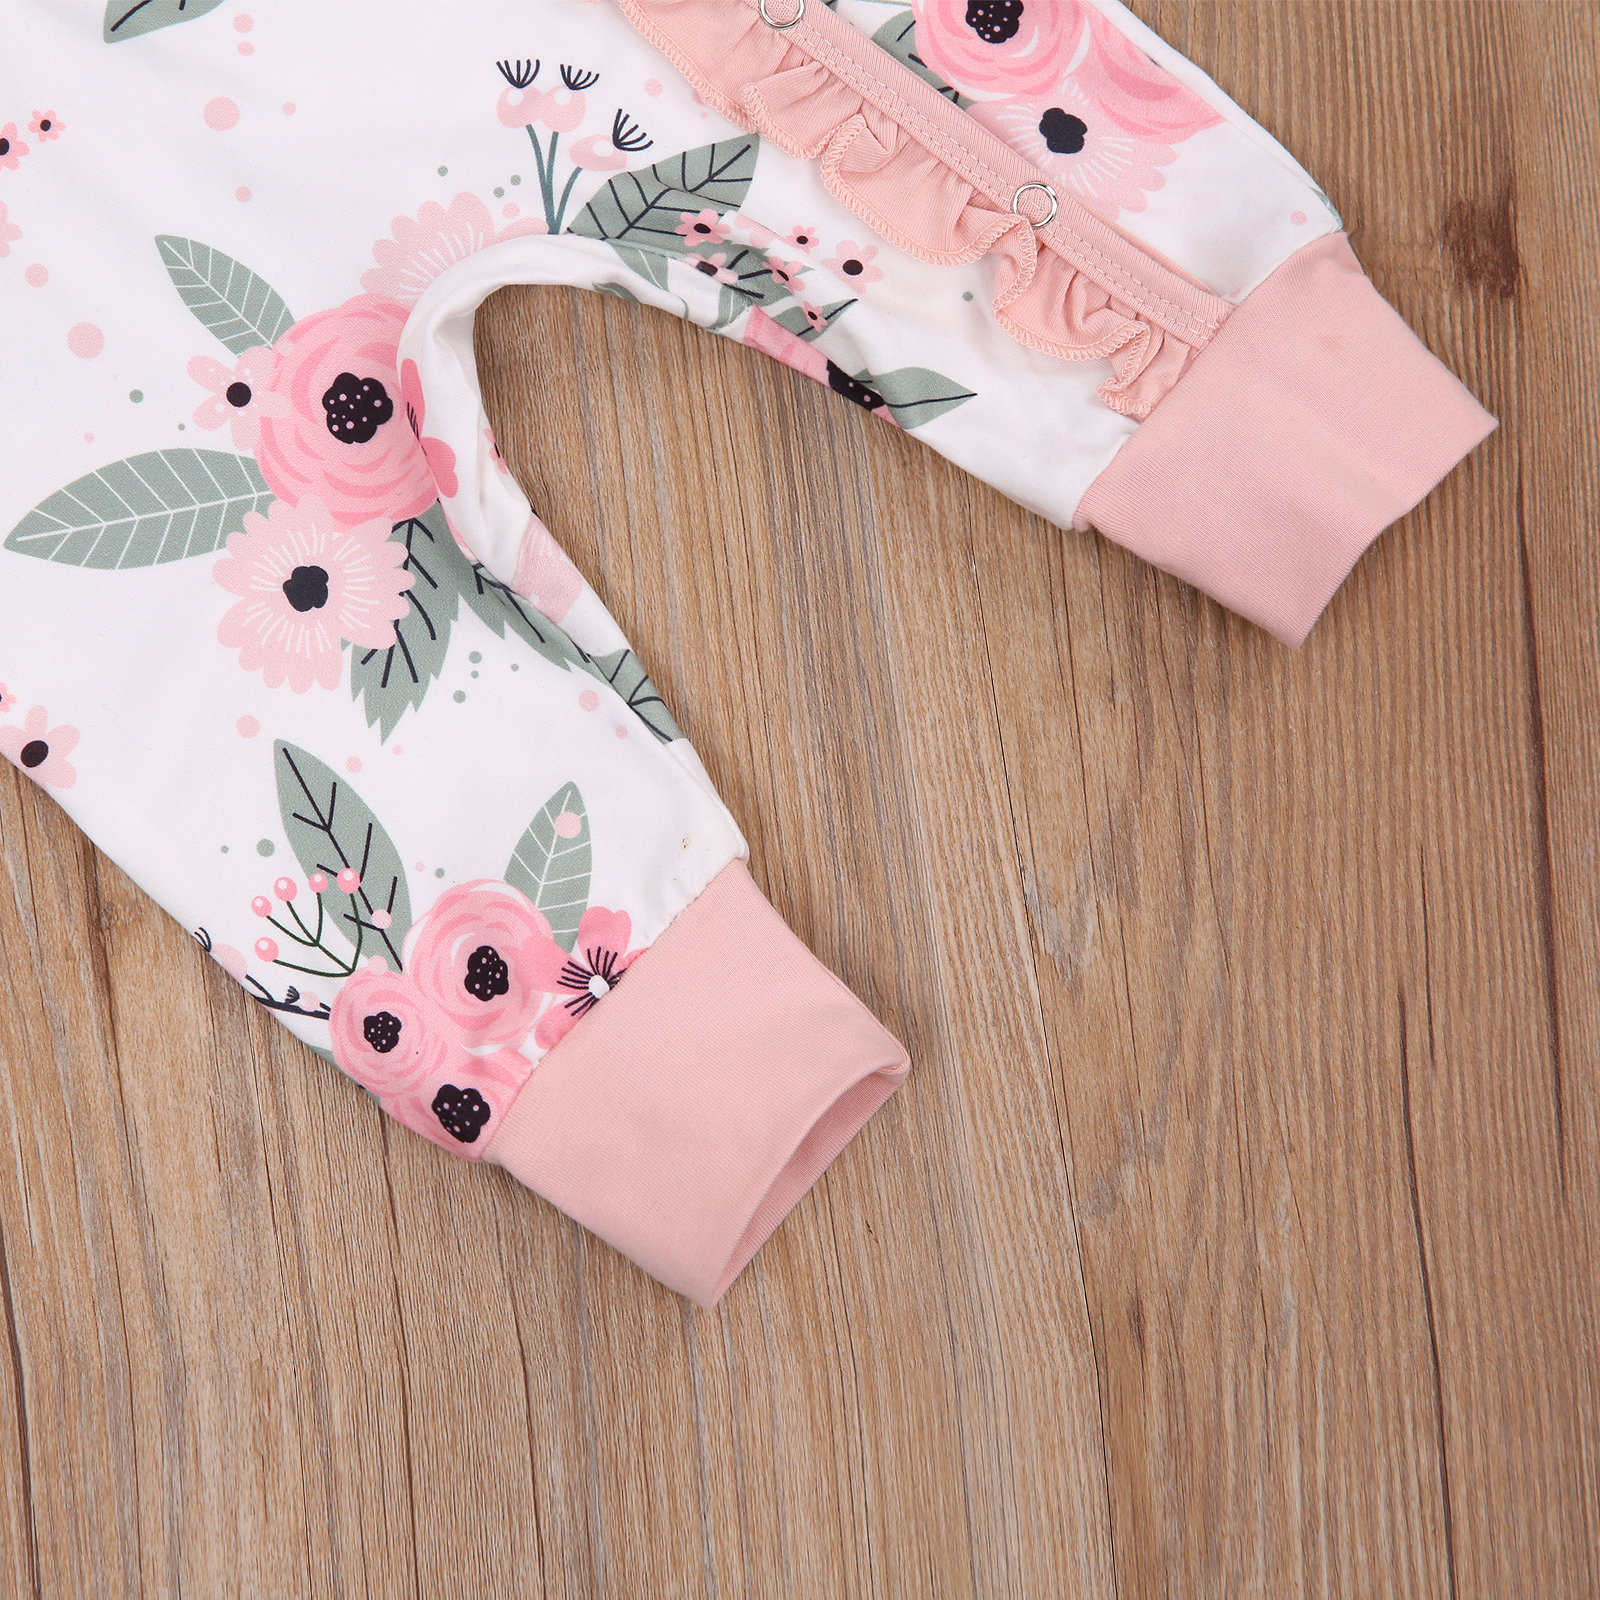 FOCUSNORM 0-18M Autumn Baby Girls Boys Rompers Headband 2pcs Flowers Print Ruffles Long Sleeve Single Breasted Jumpsuits